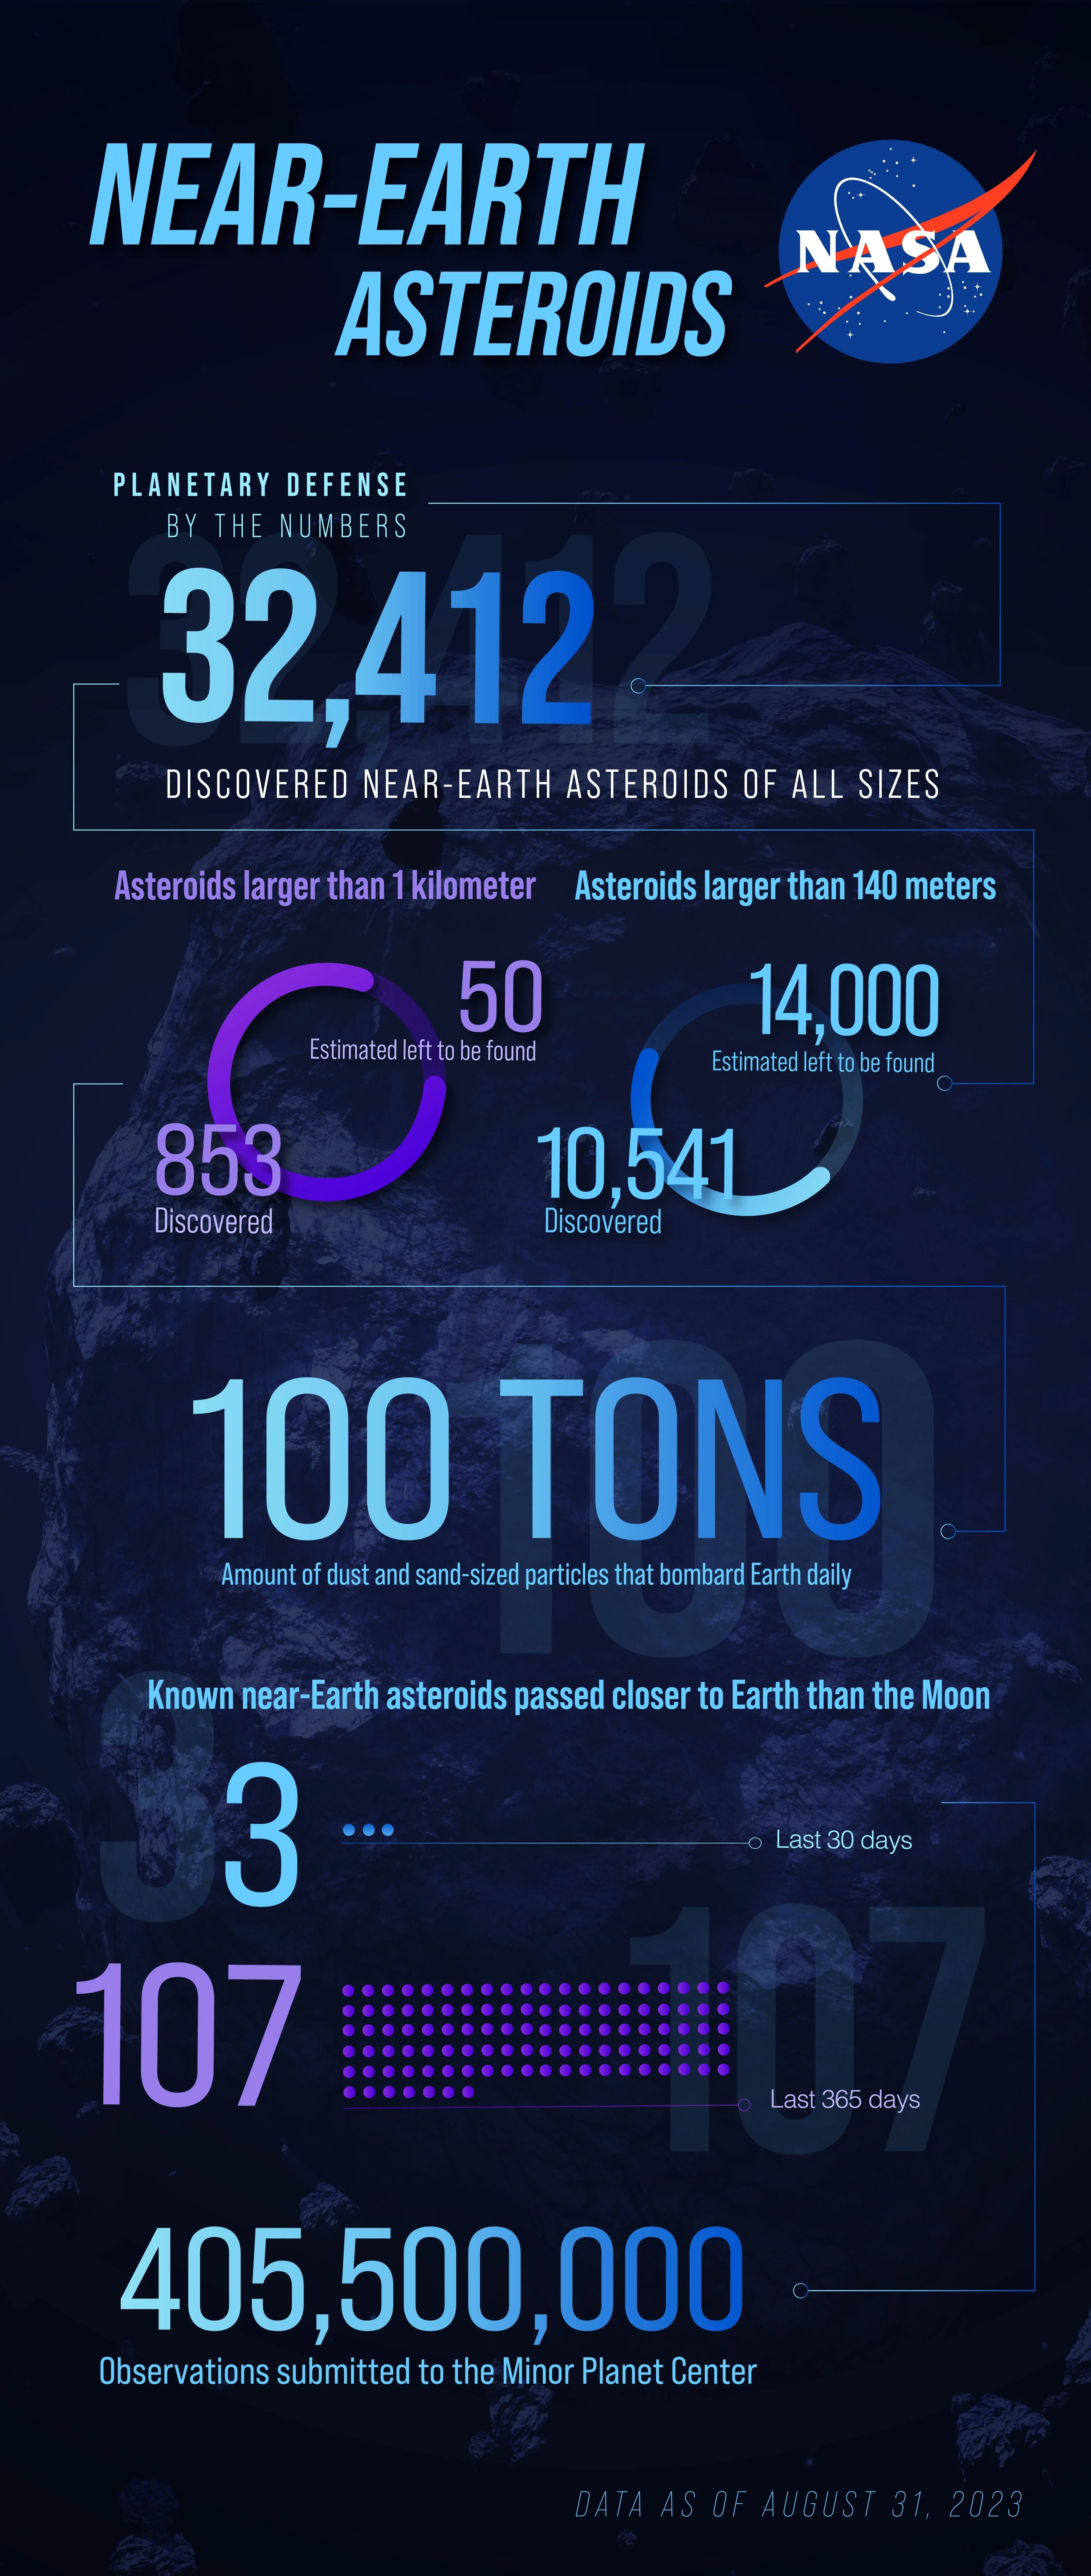 Near-Earth Asteroids by the numbers